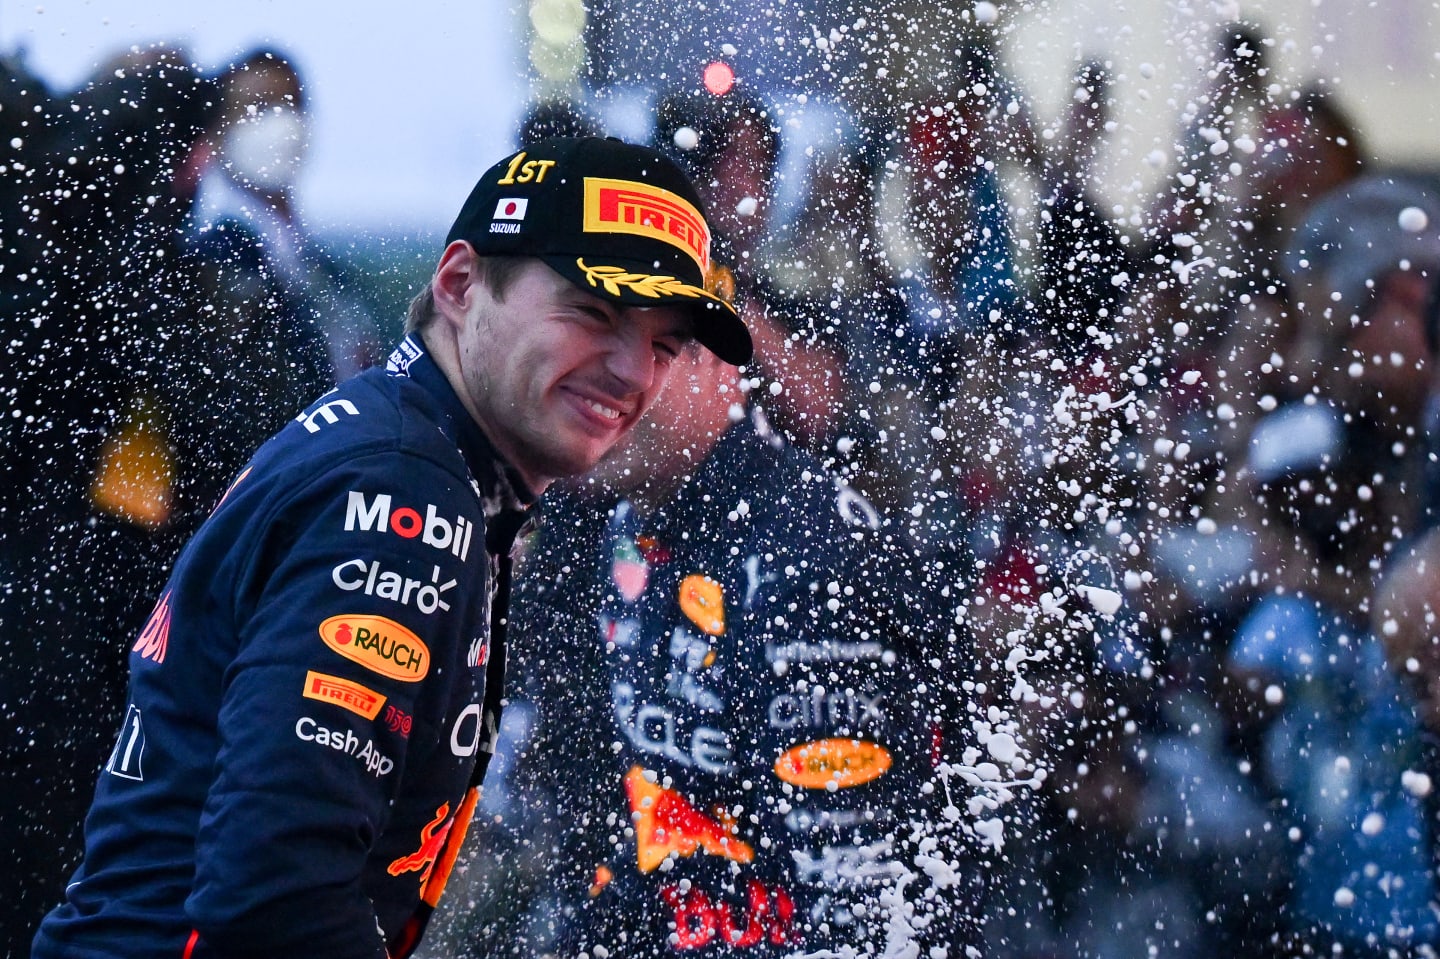 SUZUKA, JAPAN - OCTOBER 09: Race winner and 2022 F1 World Drivers Champion Max Verstappen of the Netherlands and Oracle Red Bull Racing celebrates on the podium during the F1 Grand Prix of Japan at Suzuka International Racing Course on October 09, 2022 in Suzuka, Japan. (Photo by Clive Mason/Getty Images)